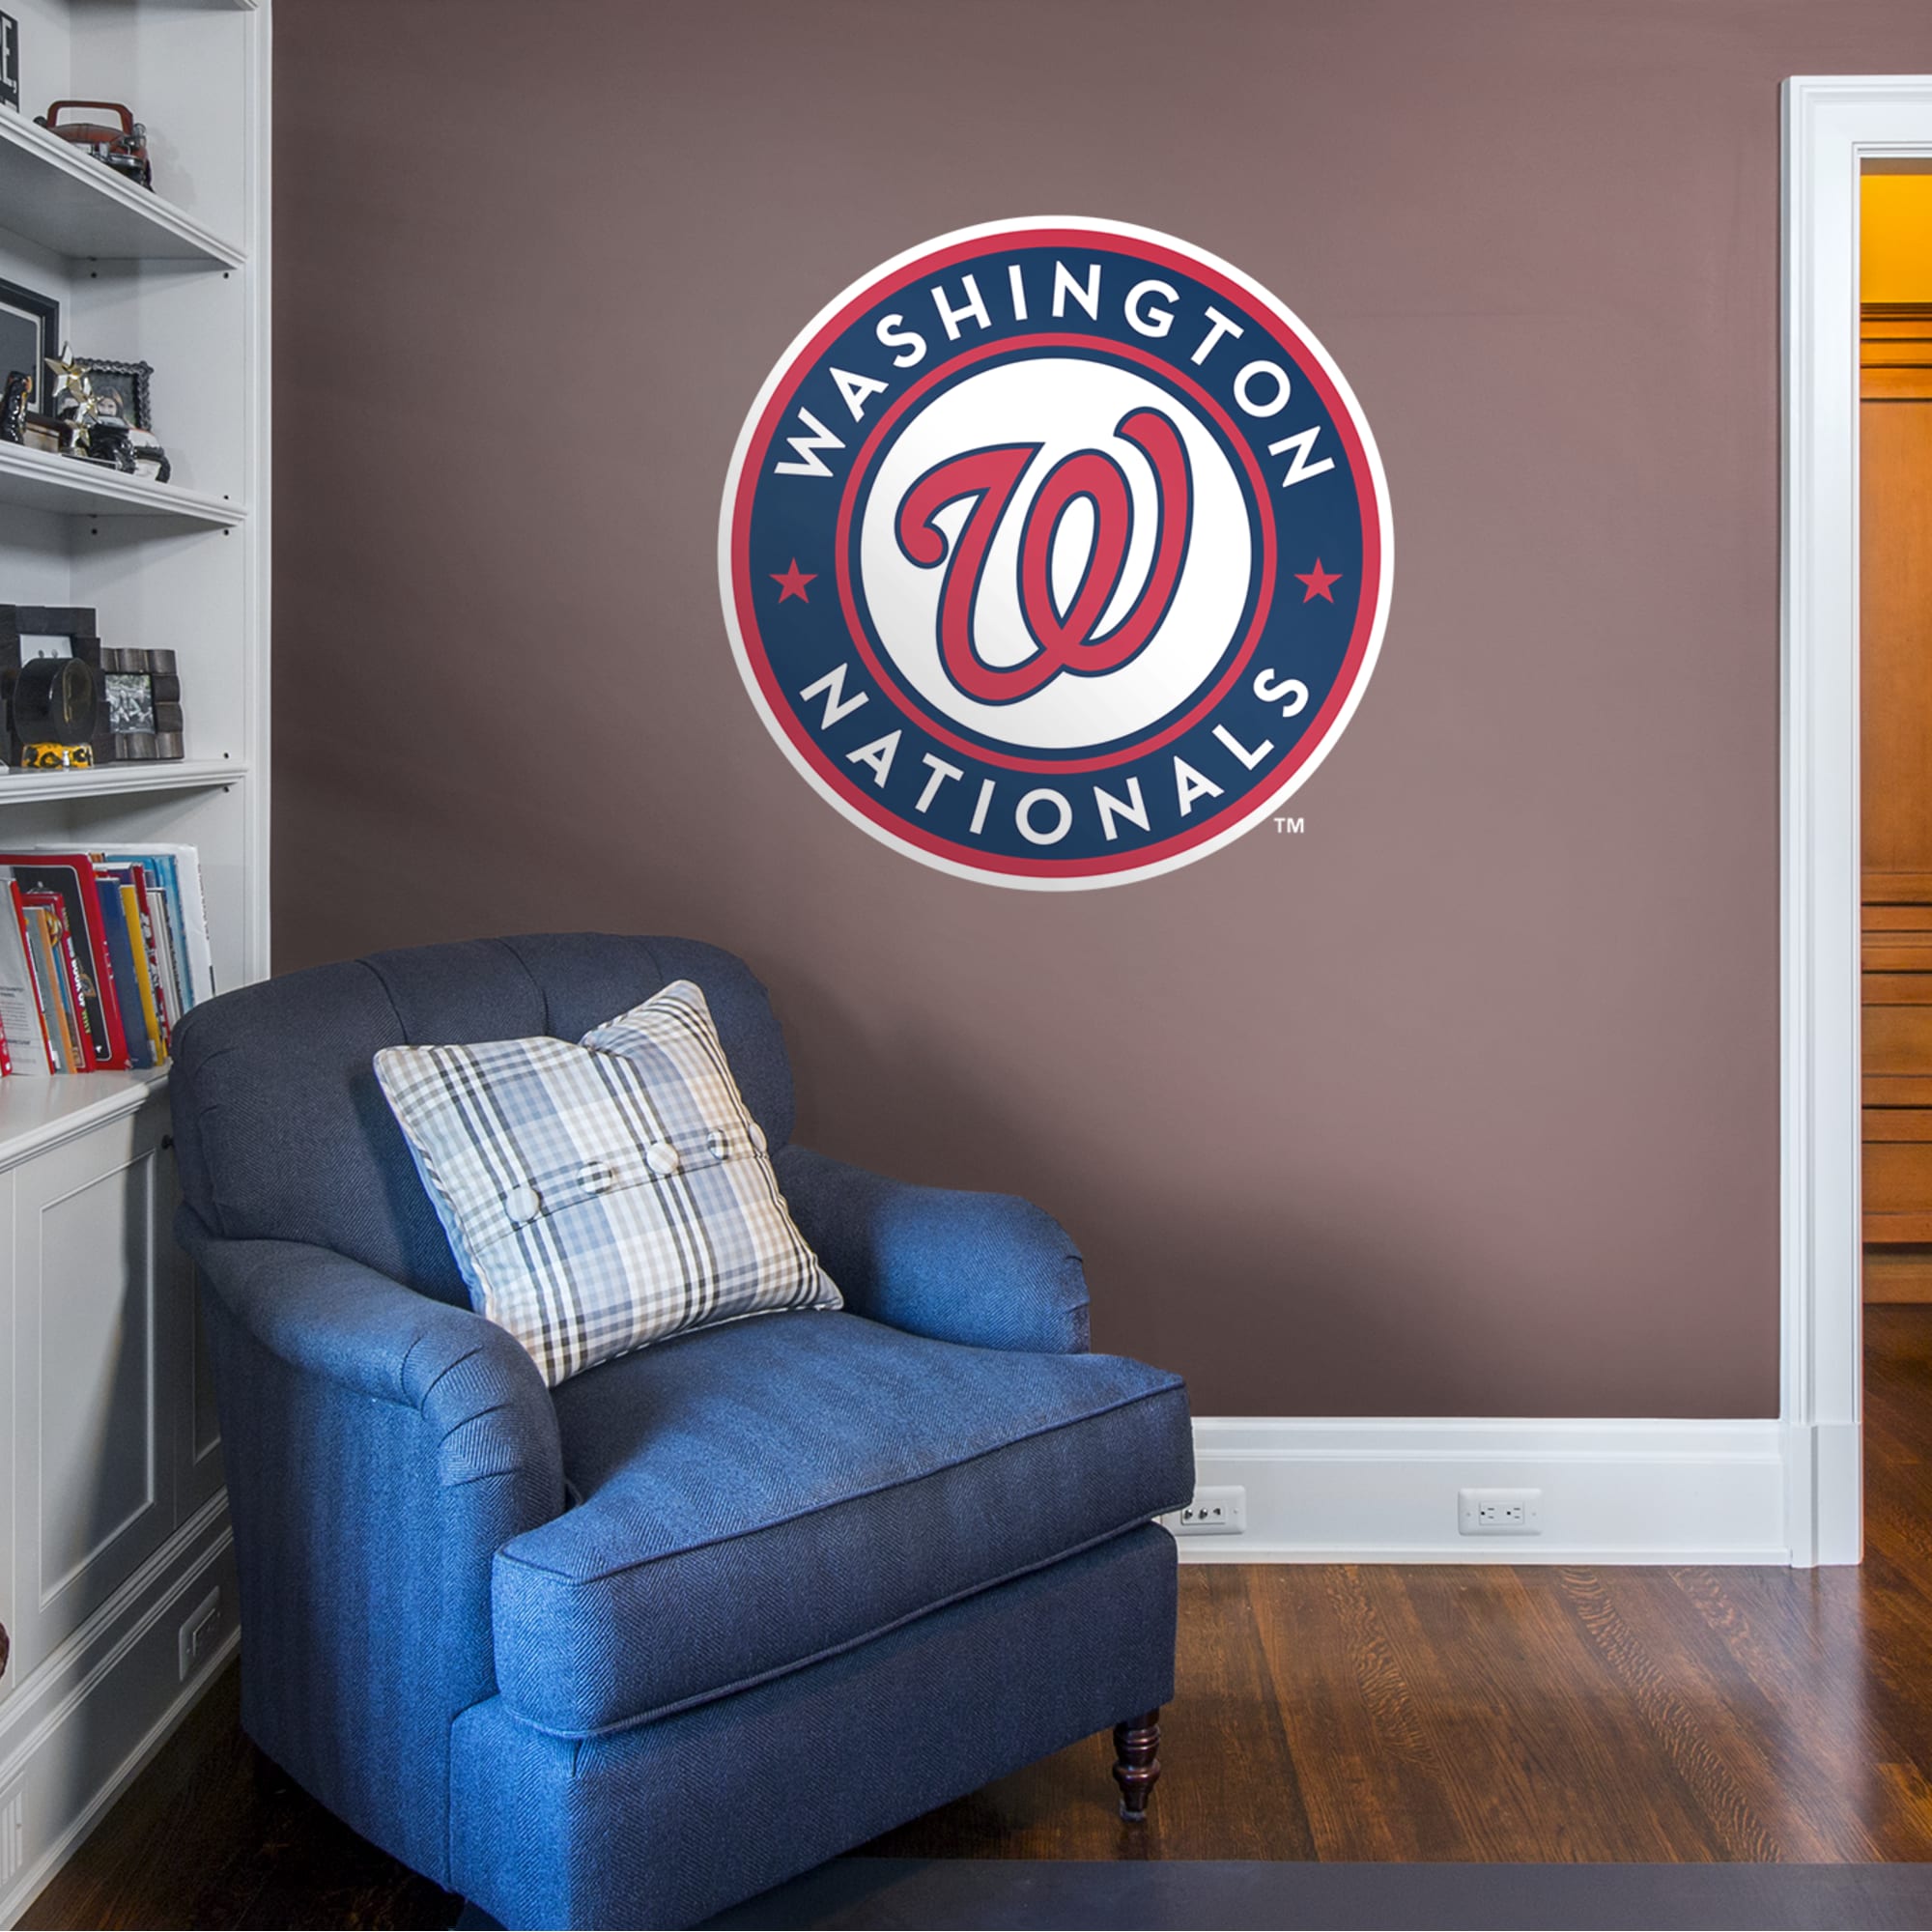 Washington Nationals: Logo - Officially Licensed MLB Removable Wall Decal Giant Logo (39"W x 39"H) by Fathead | Vinyl